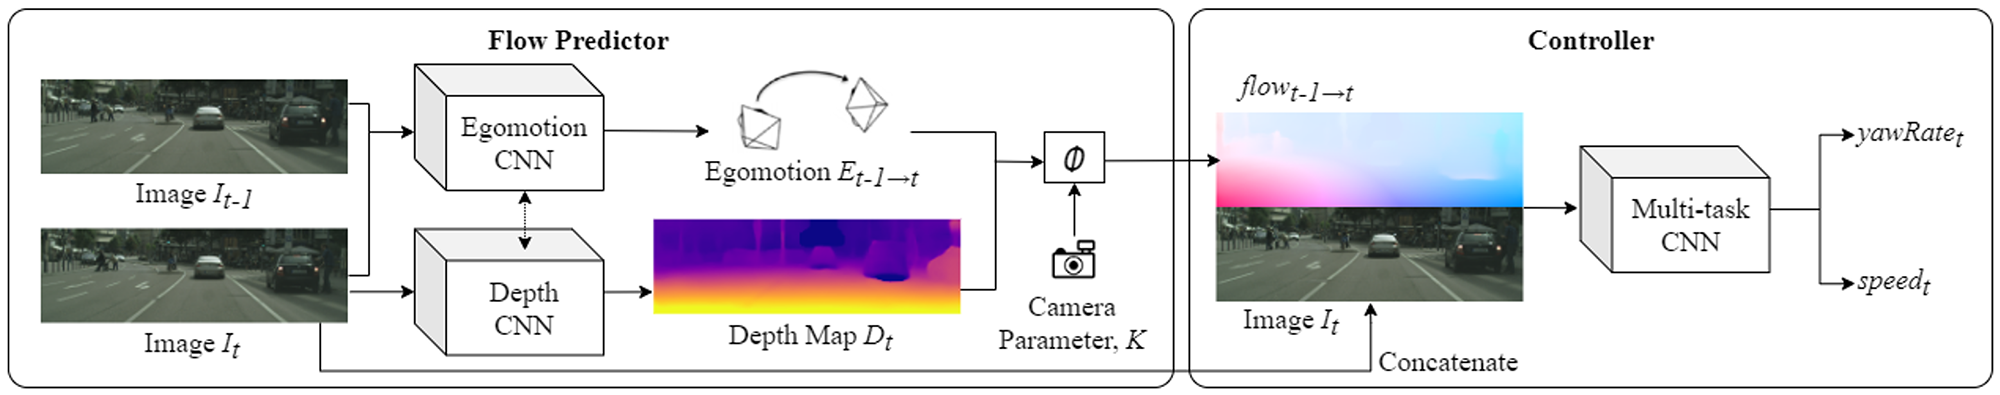 Multi-task Deep Learning with Optical Flow Features for Self-Driving Cars